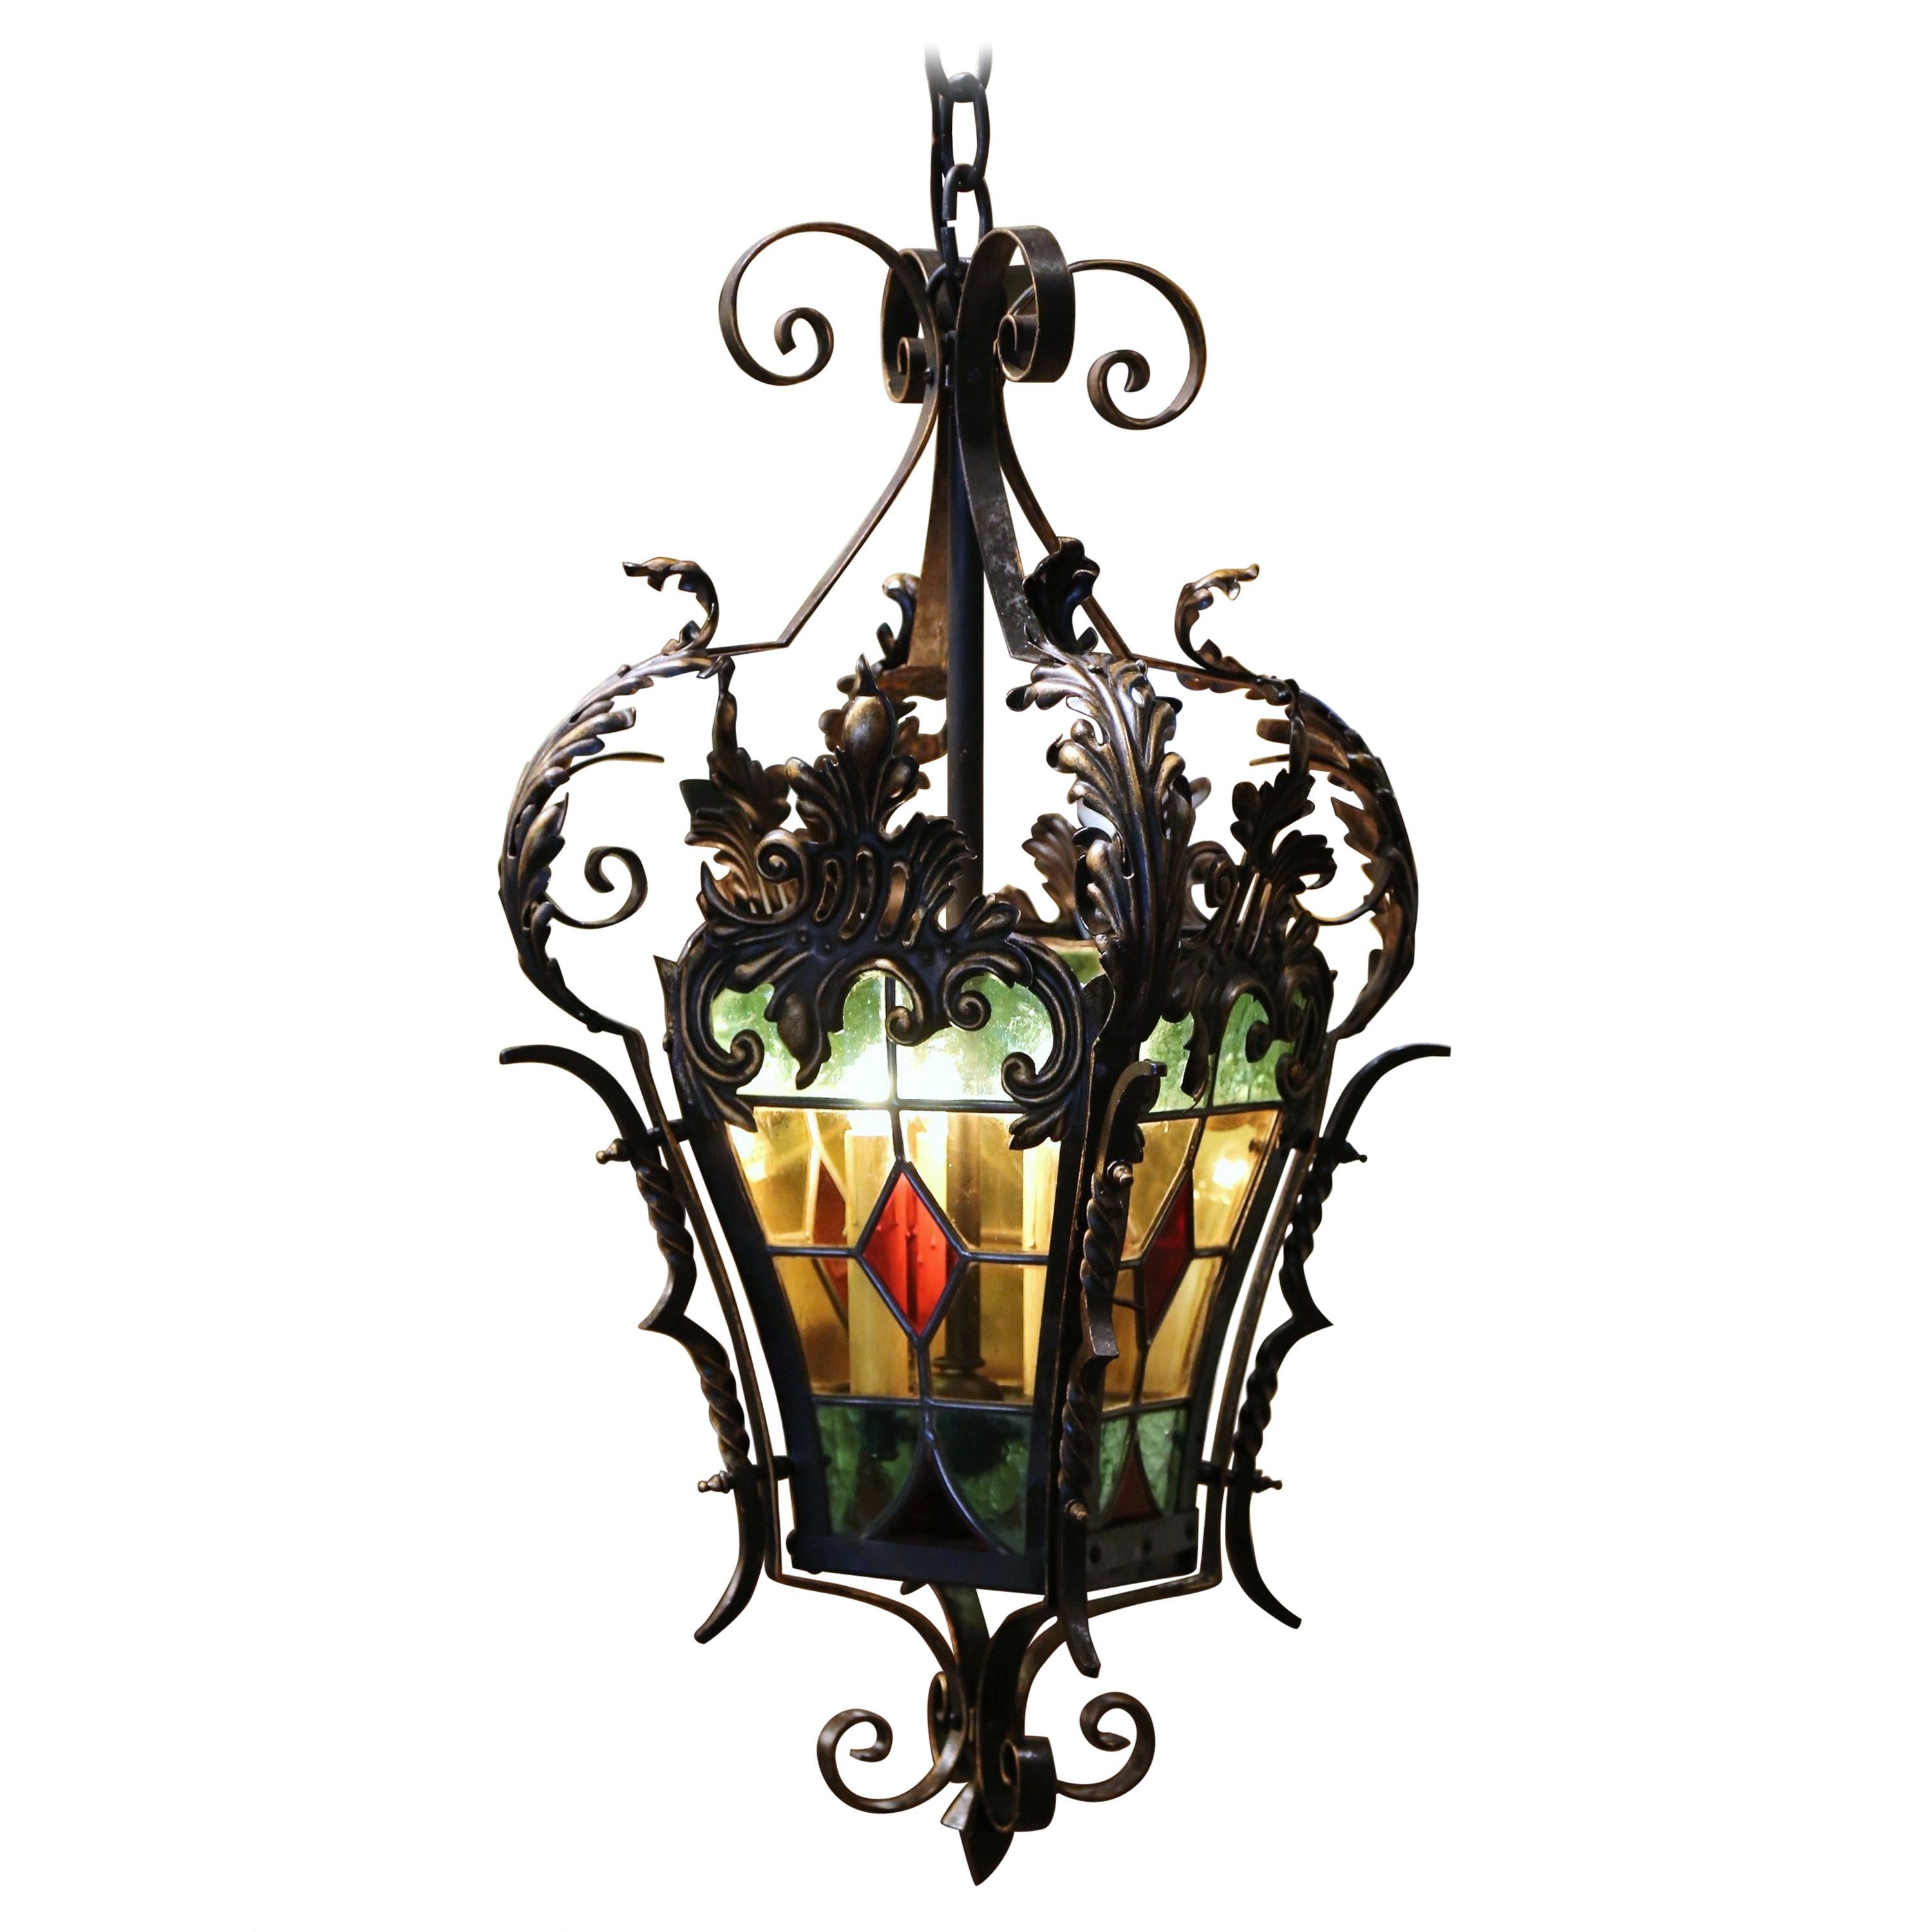 19th Century, French Napoleon III Iron and Stained Glass Three-Light Lantern